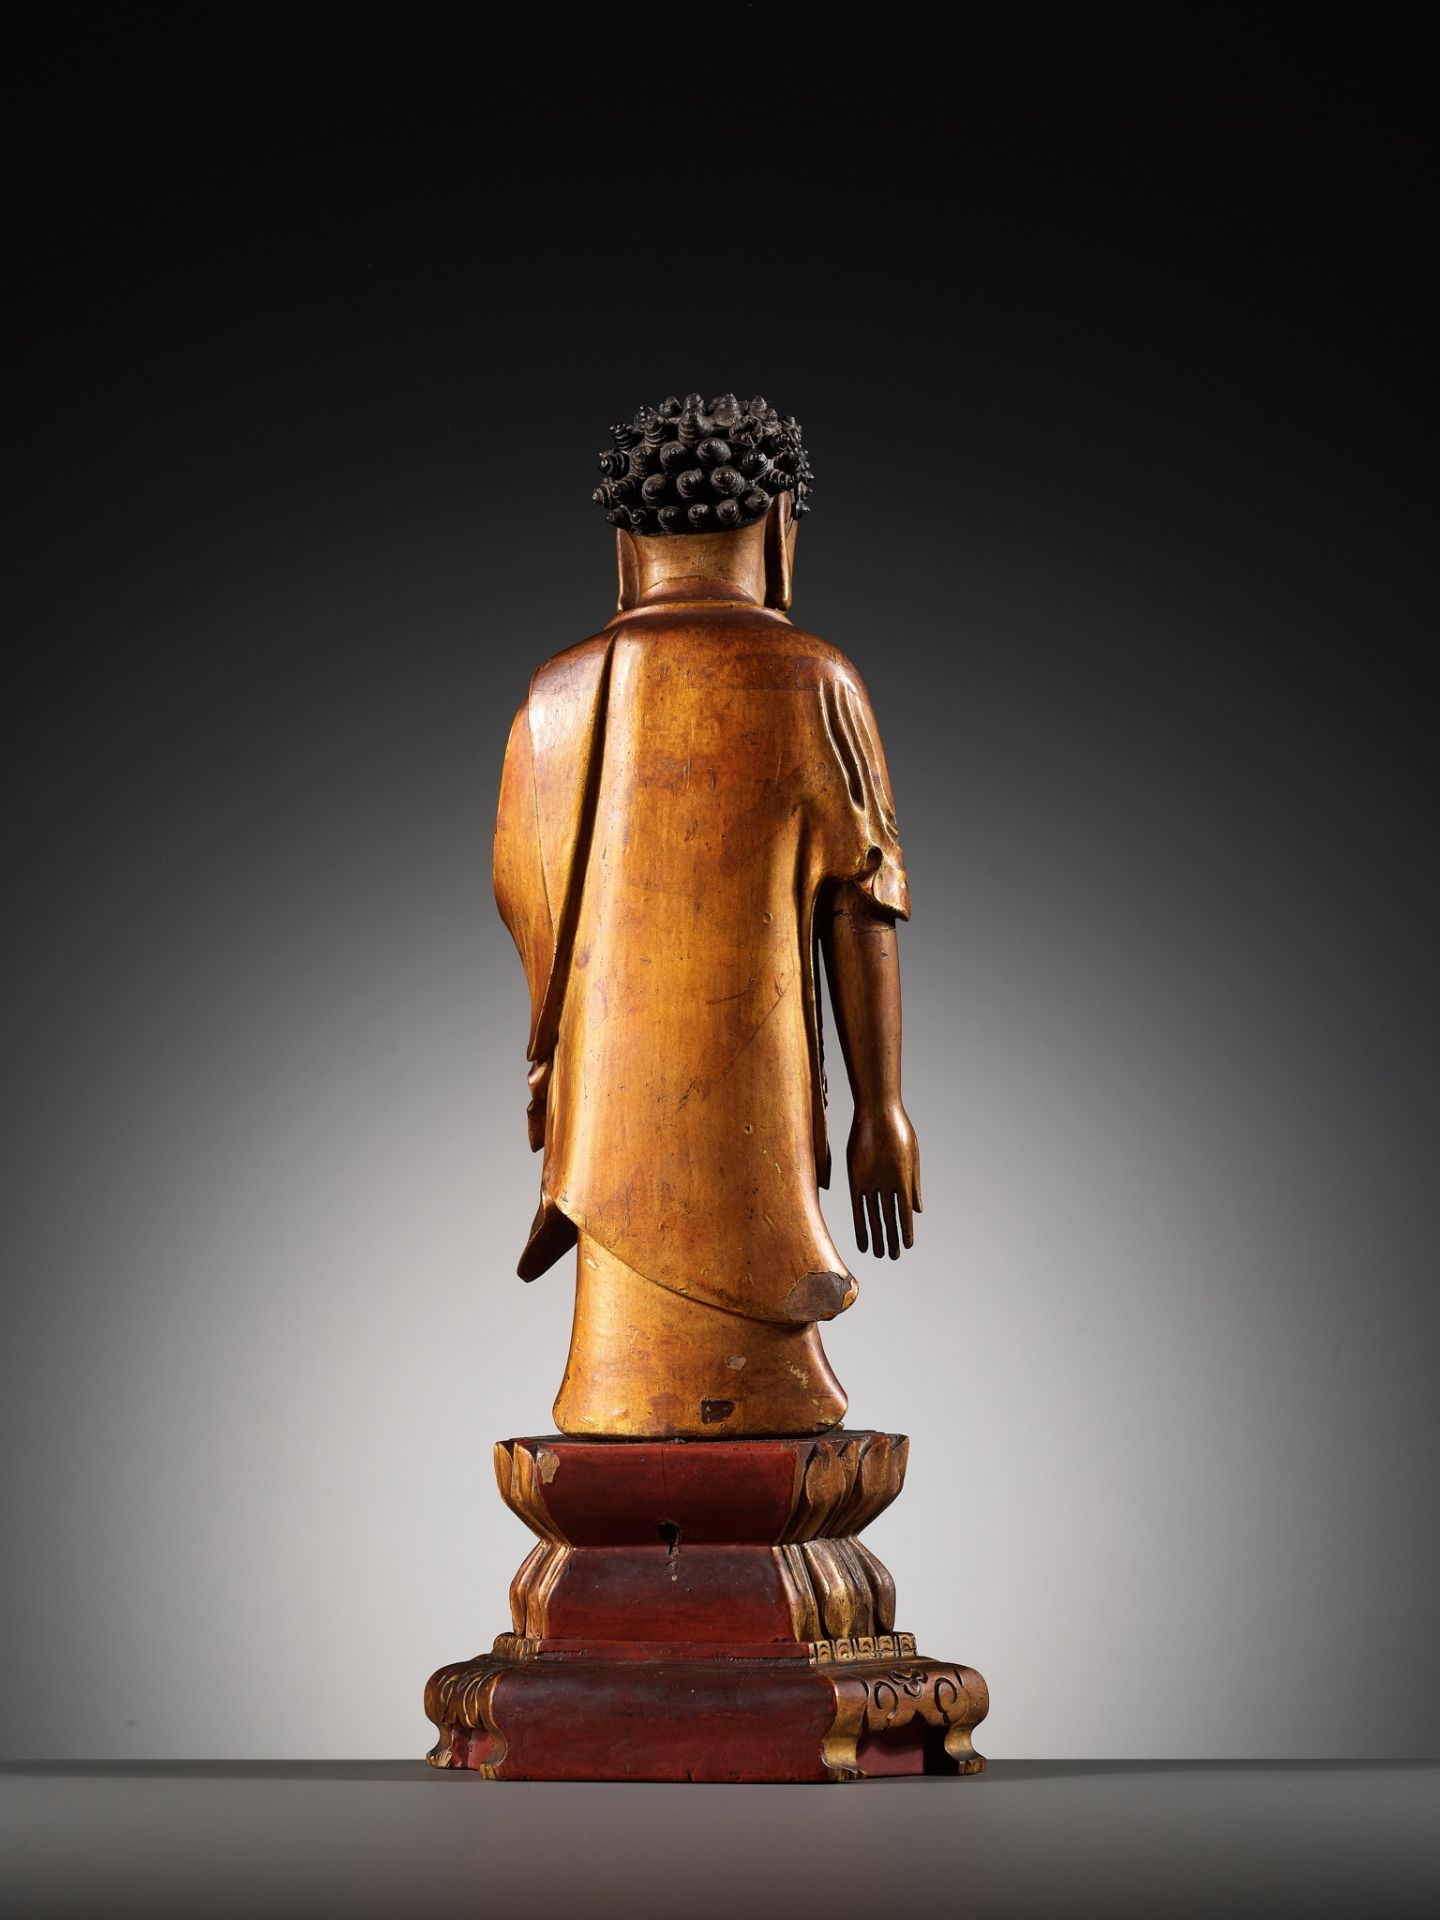 A LACQUER-GILT WOOD FIGURE OF THE STANDING BUDDHA, CHINA, 17TH - 18TH CENTURY - Image 12 of 15